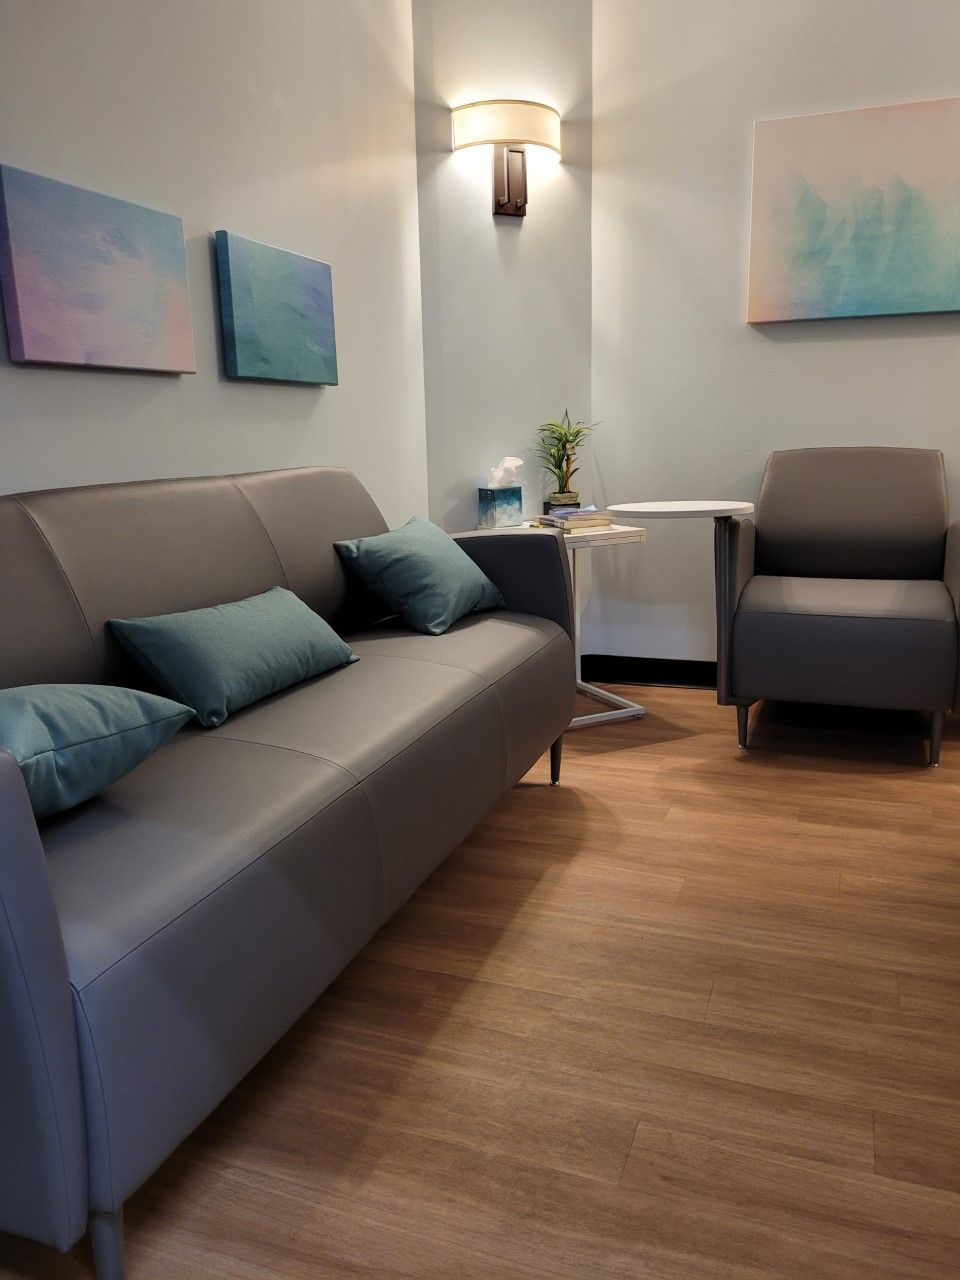 Gallery Photo of Behavioral Health Room at CVS MinuteClinic